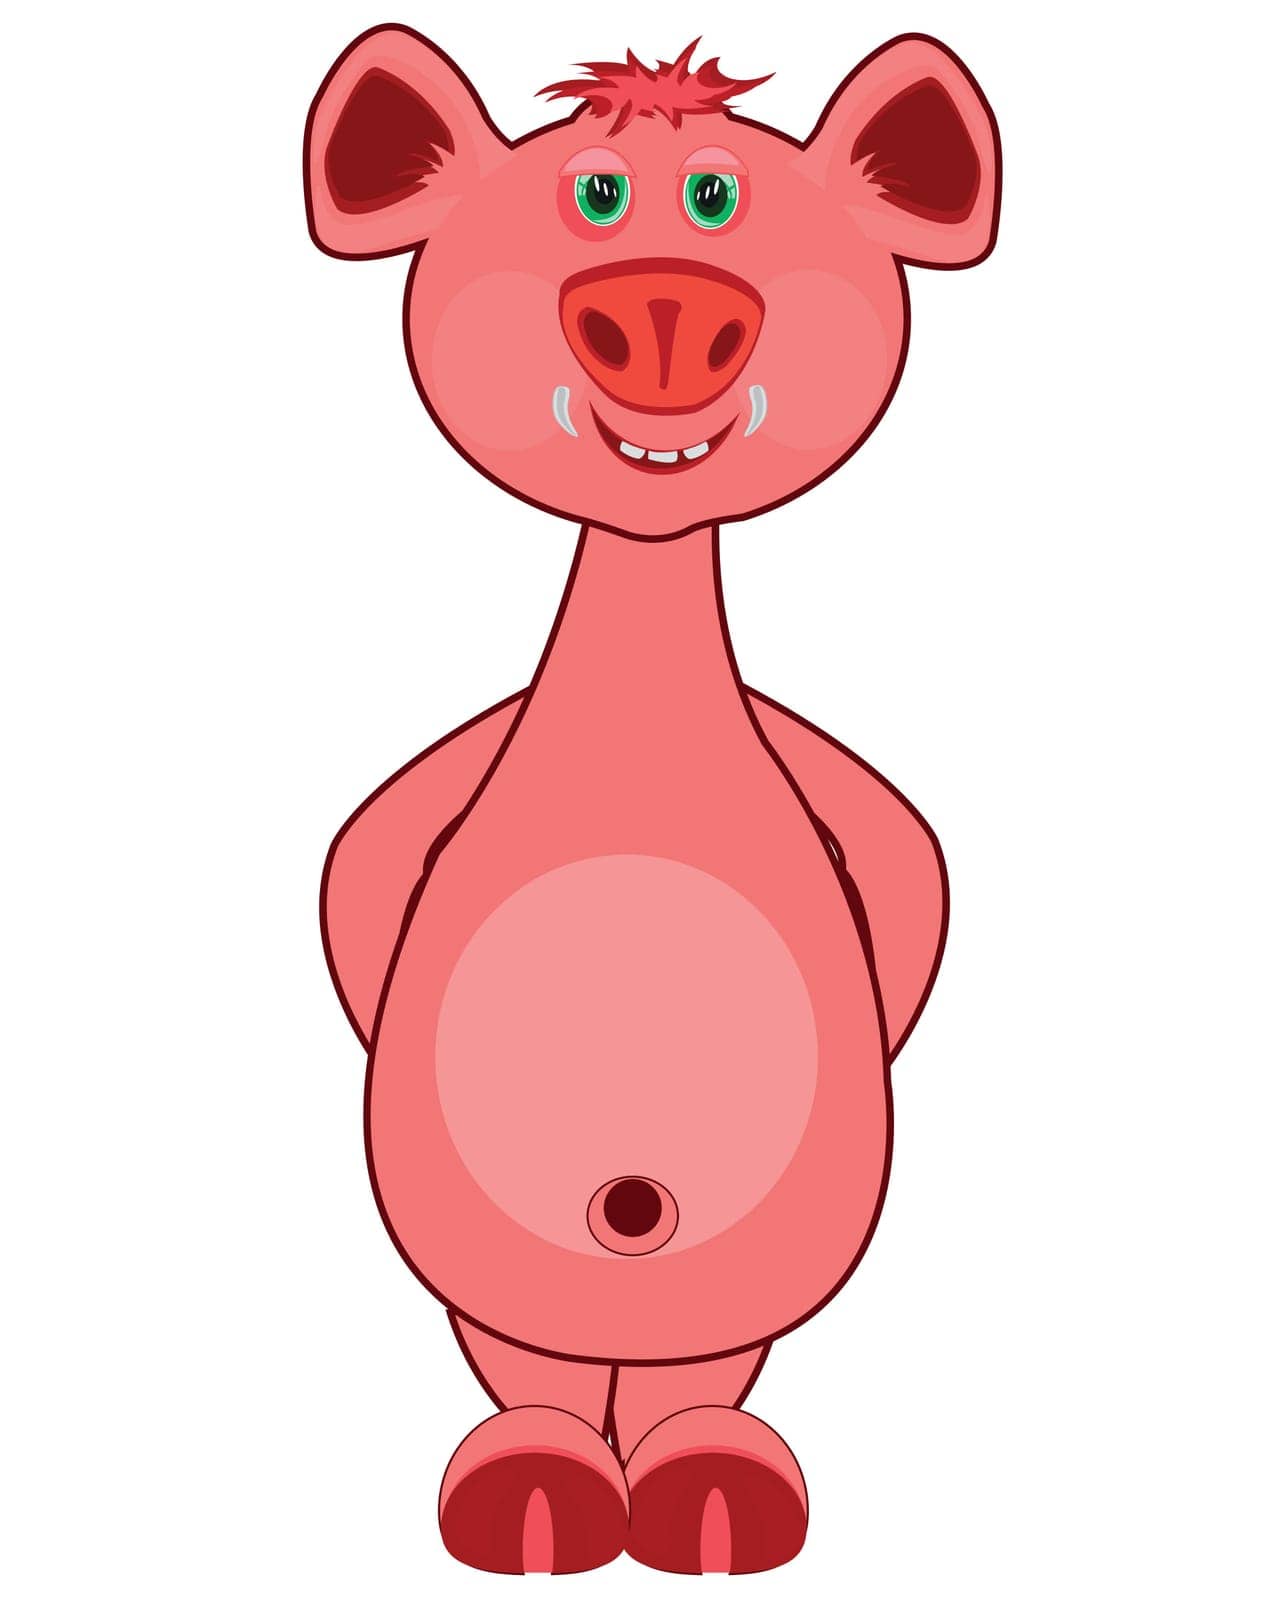 Cartoon piglet on white background is insulated by cobol1964